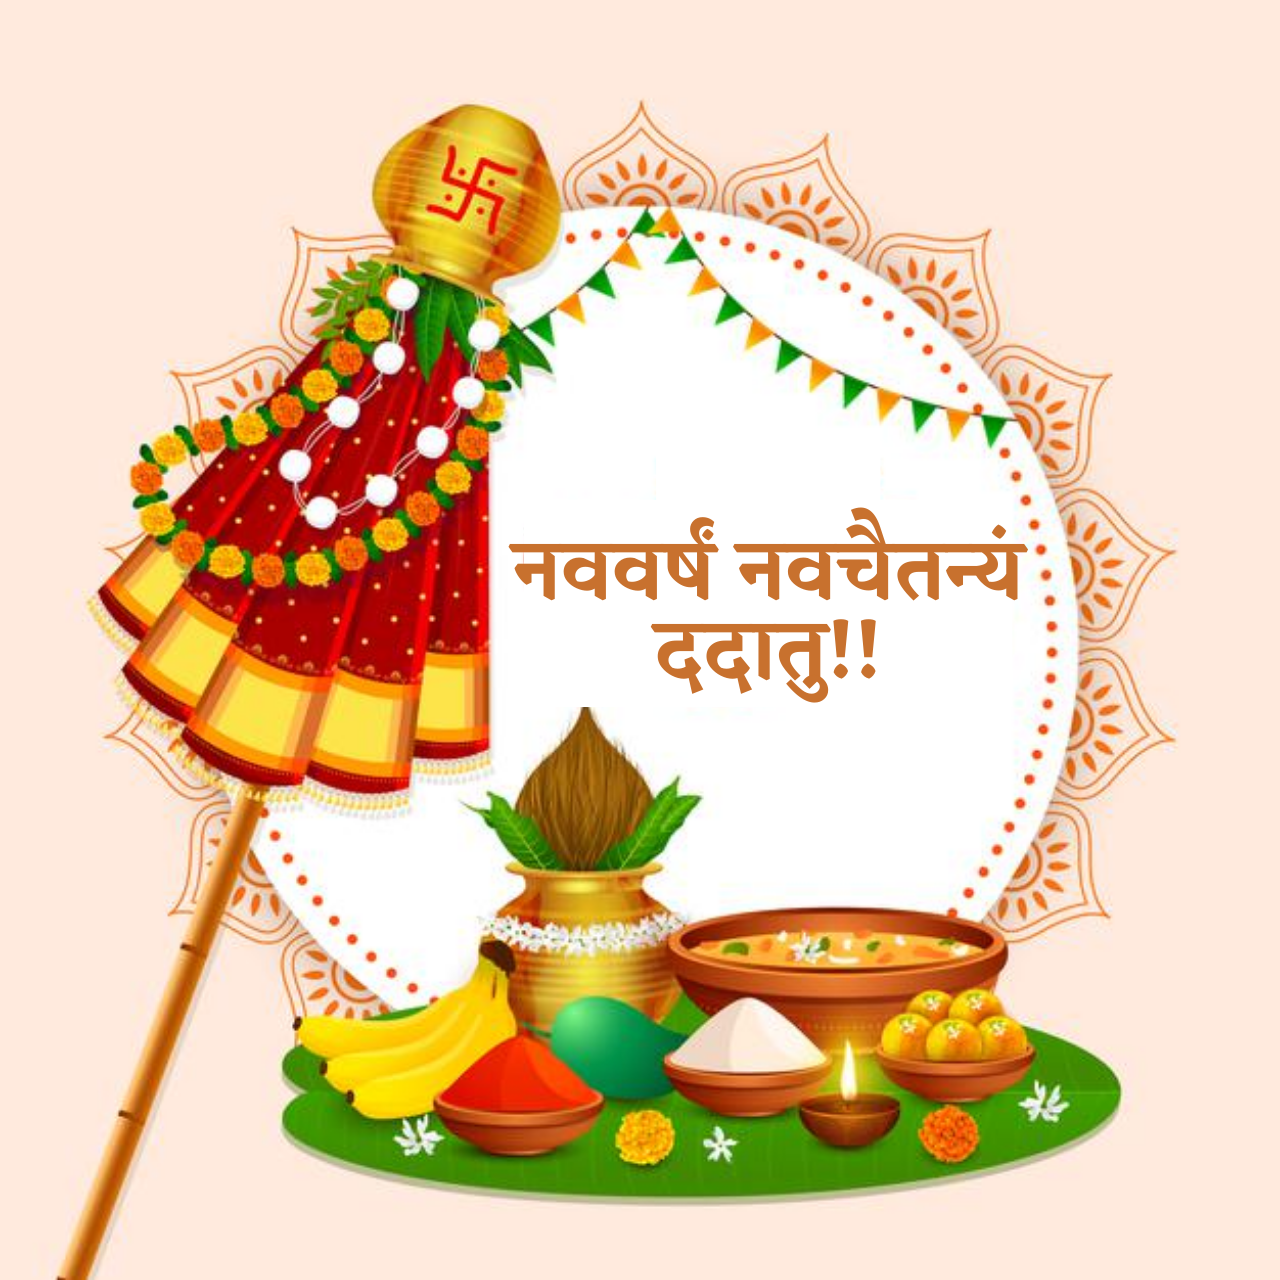 Happy Gudi Padwa 2021 Wishes in Sanskrit, Messages, Greetings, and Quotes to Share on Marathi New Year